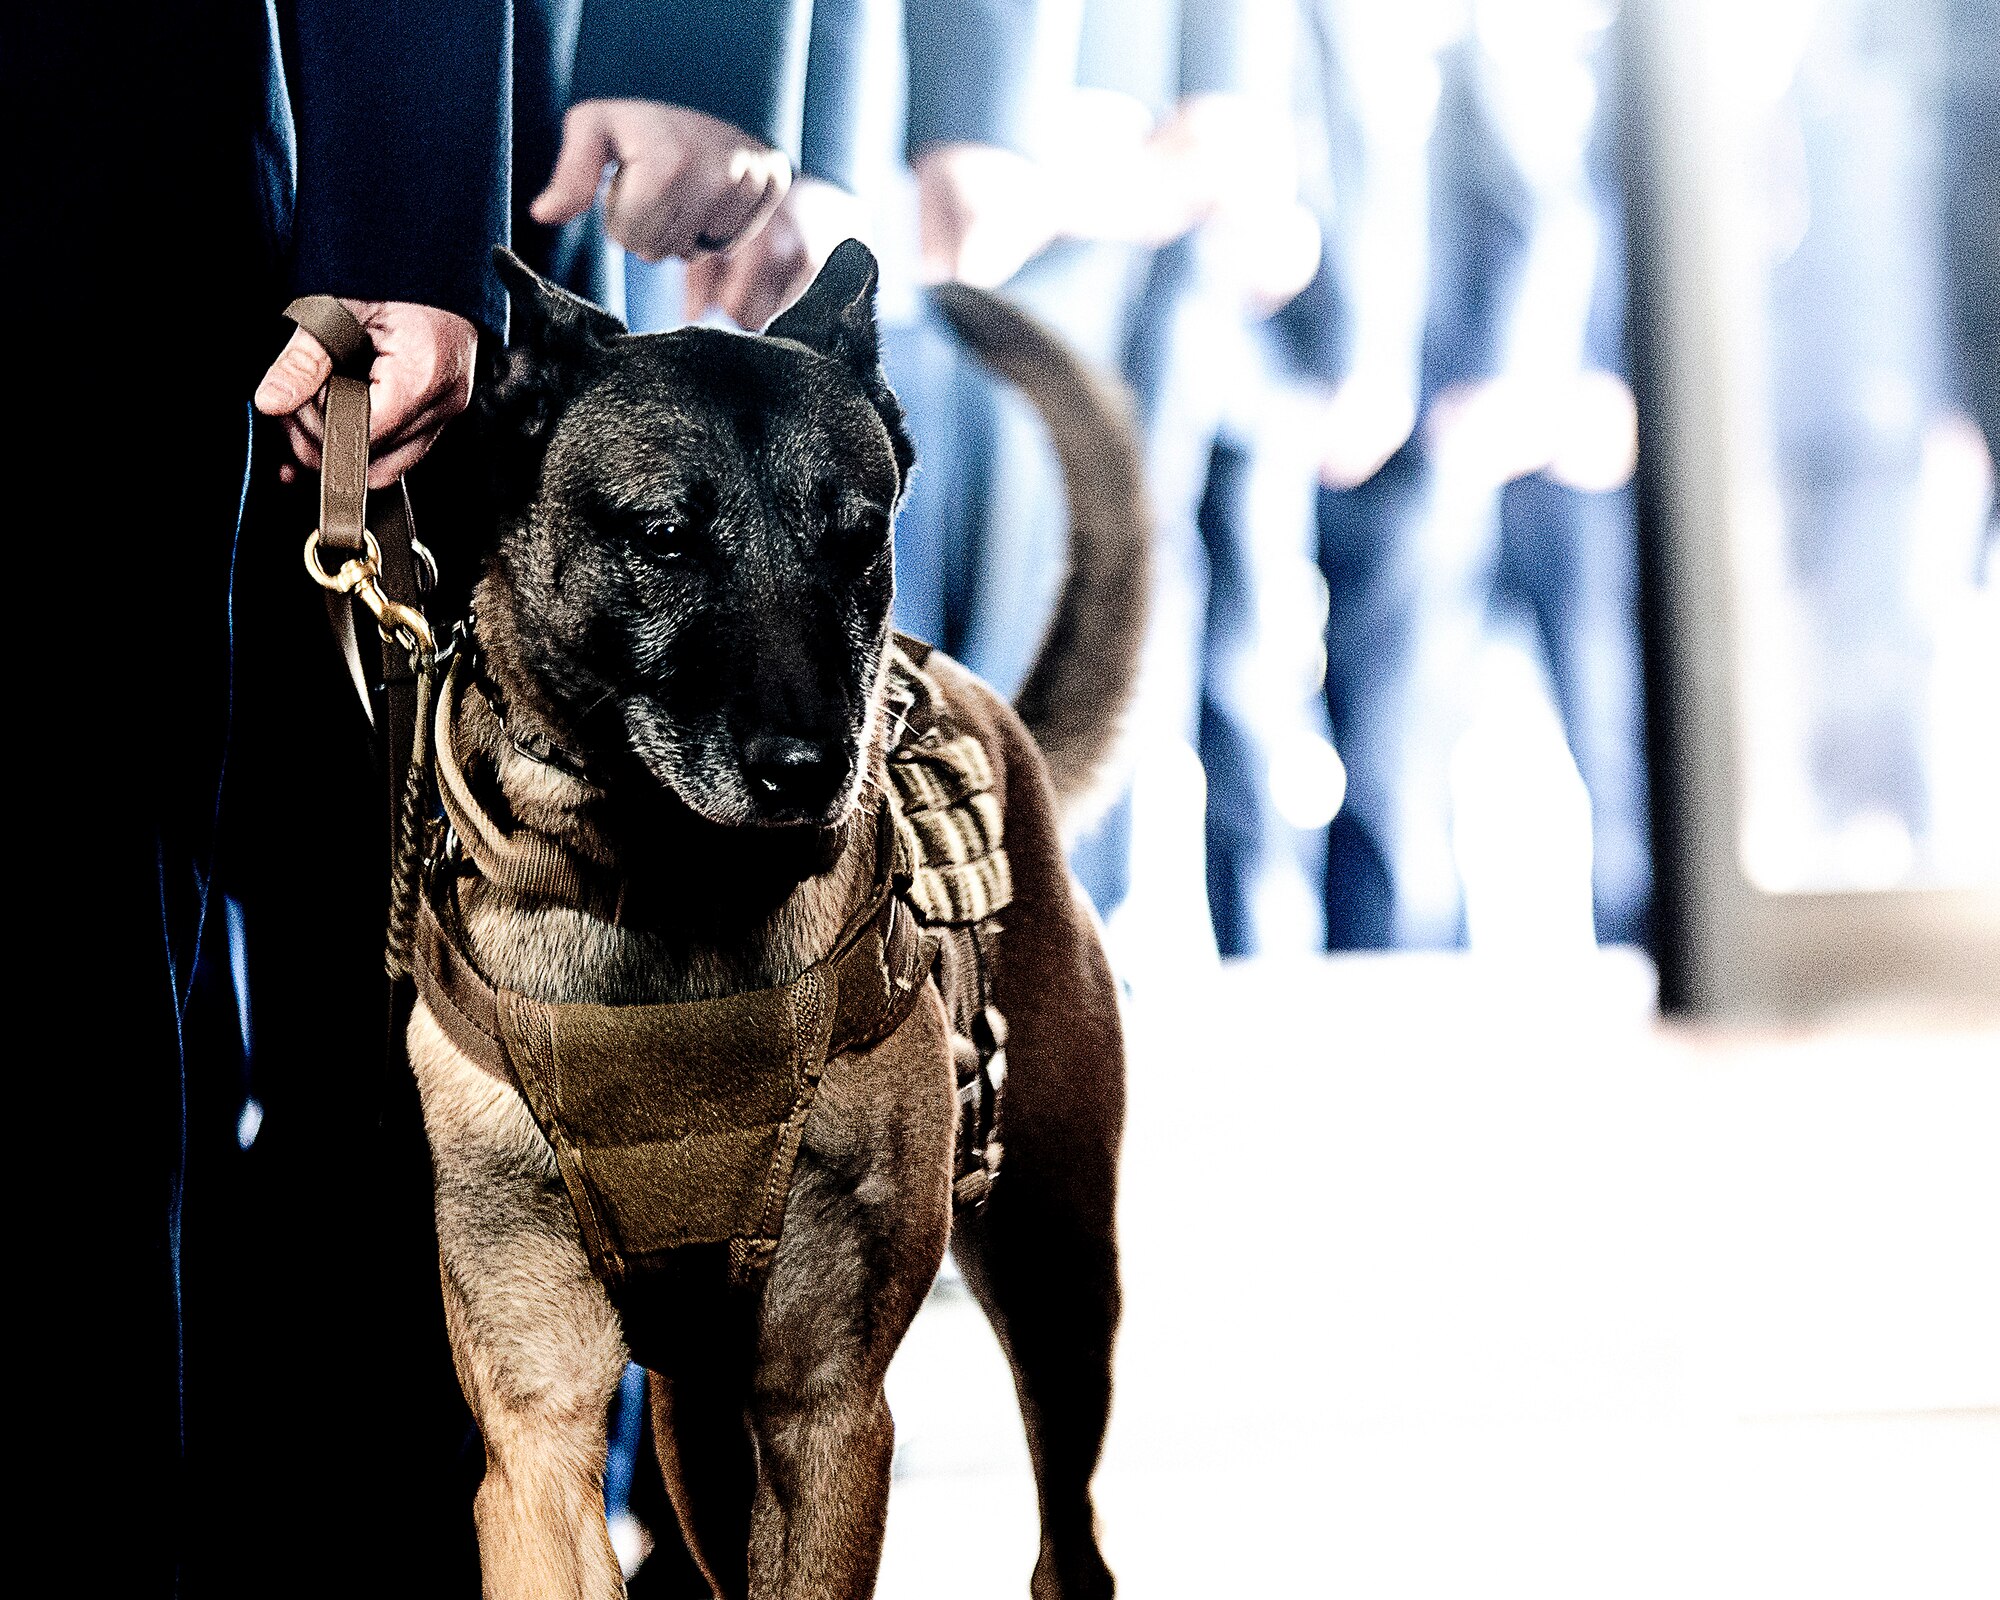 An 87th Security Forces military working dog enters the McGuire Chapel on Joint Base McGuire-Dix-Lakehurst, New Jersey, during a memorial ceremony Nov. 1, 2019. The ceremony honored the memory of military working dogs Robby and Bagira, who both served the U.S. as patrol explosive detector dogs.